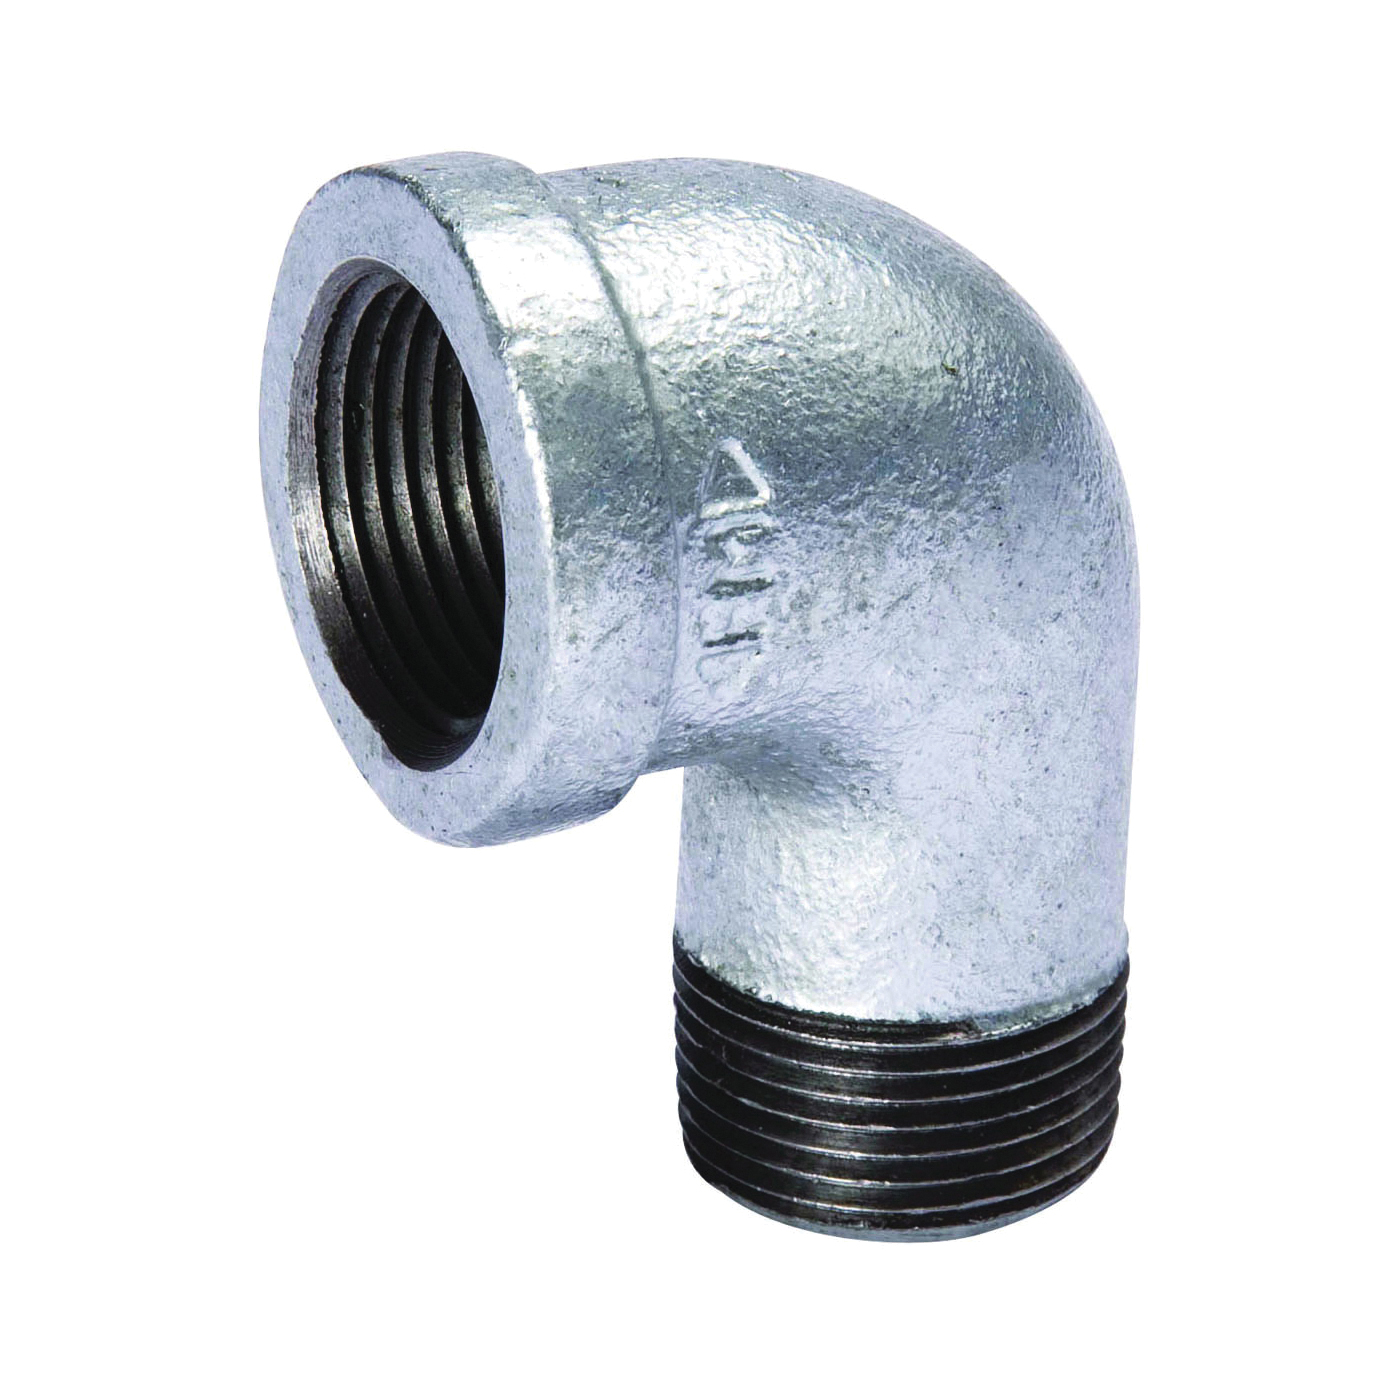 510-310BC Street Pipe Elbow, 3 in, Threaded, 90 deg Angle, 300 psi Pressure